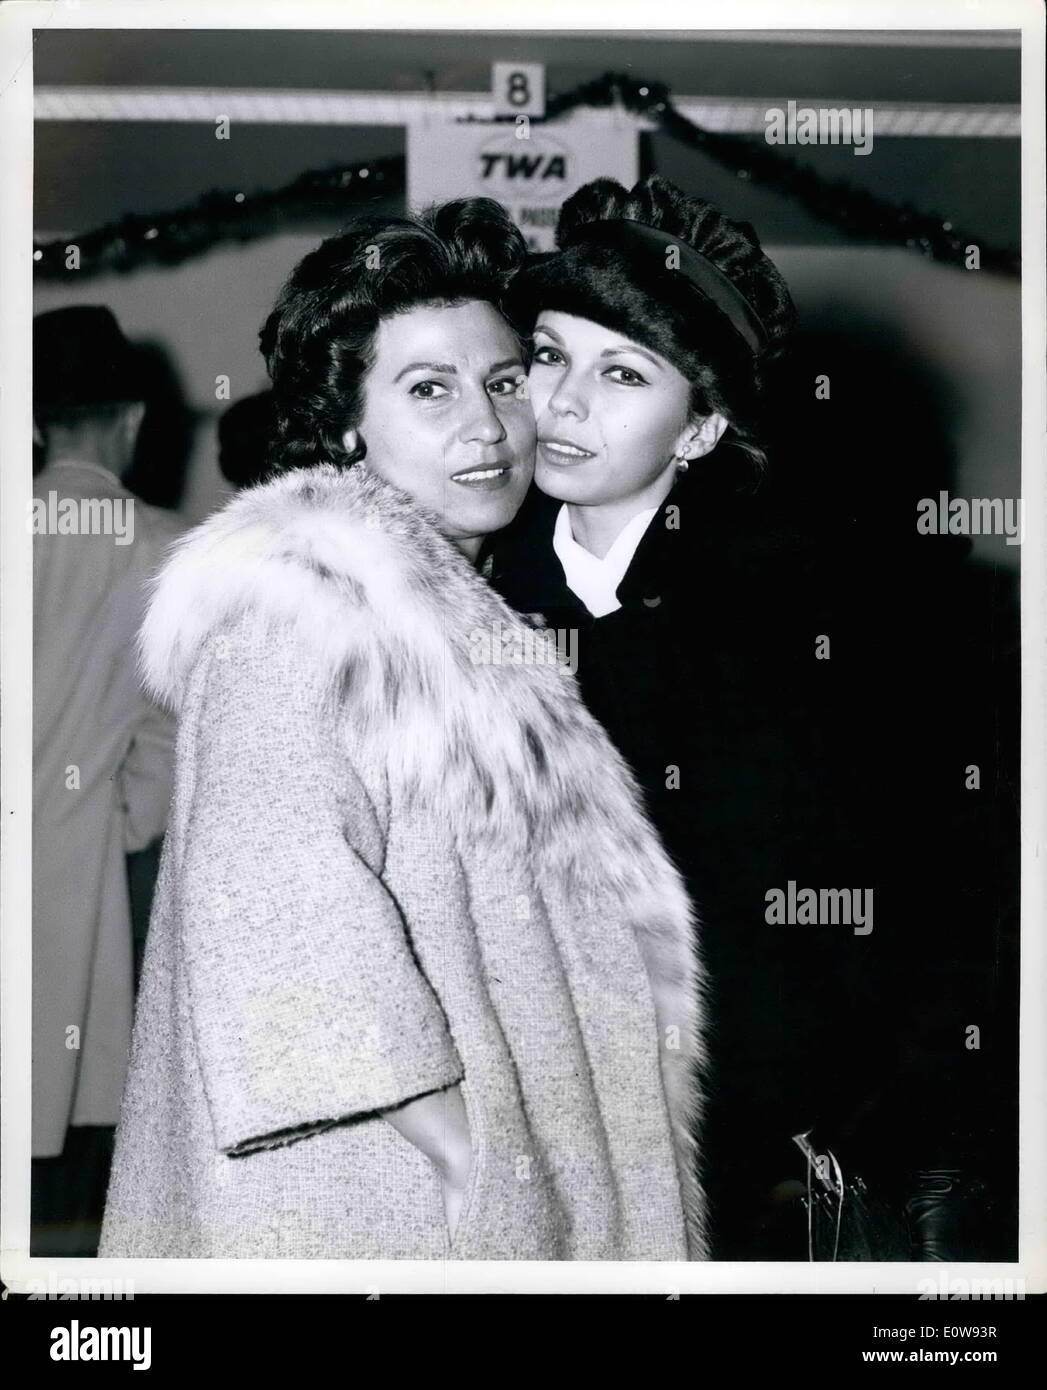 Dec. 12, 1961 - New York International Airport: Nancy Sinatra, ex-wife of singer-actor-producer Frank Sinatra, is shown being greeted by daughter Nancy on arrival from Los Angeles via TWA SuperJet. She is here to spend the Christmas holidays with her children and will stay at daughter Nany's New York apartment while latter's husband, singer Tommy Sanda, is abroad. Stock Photo